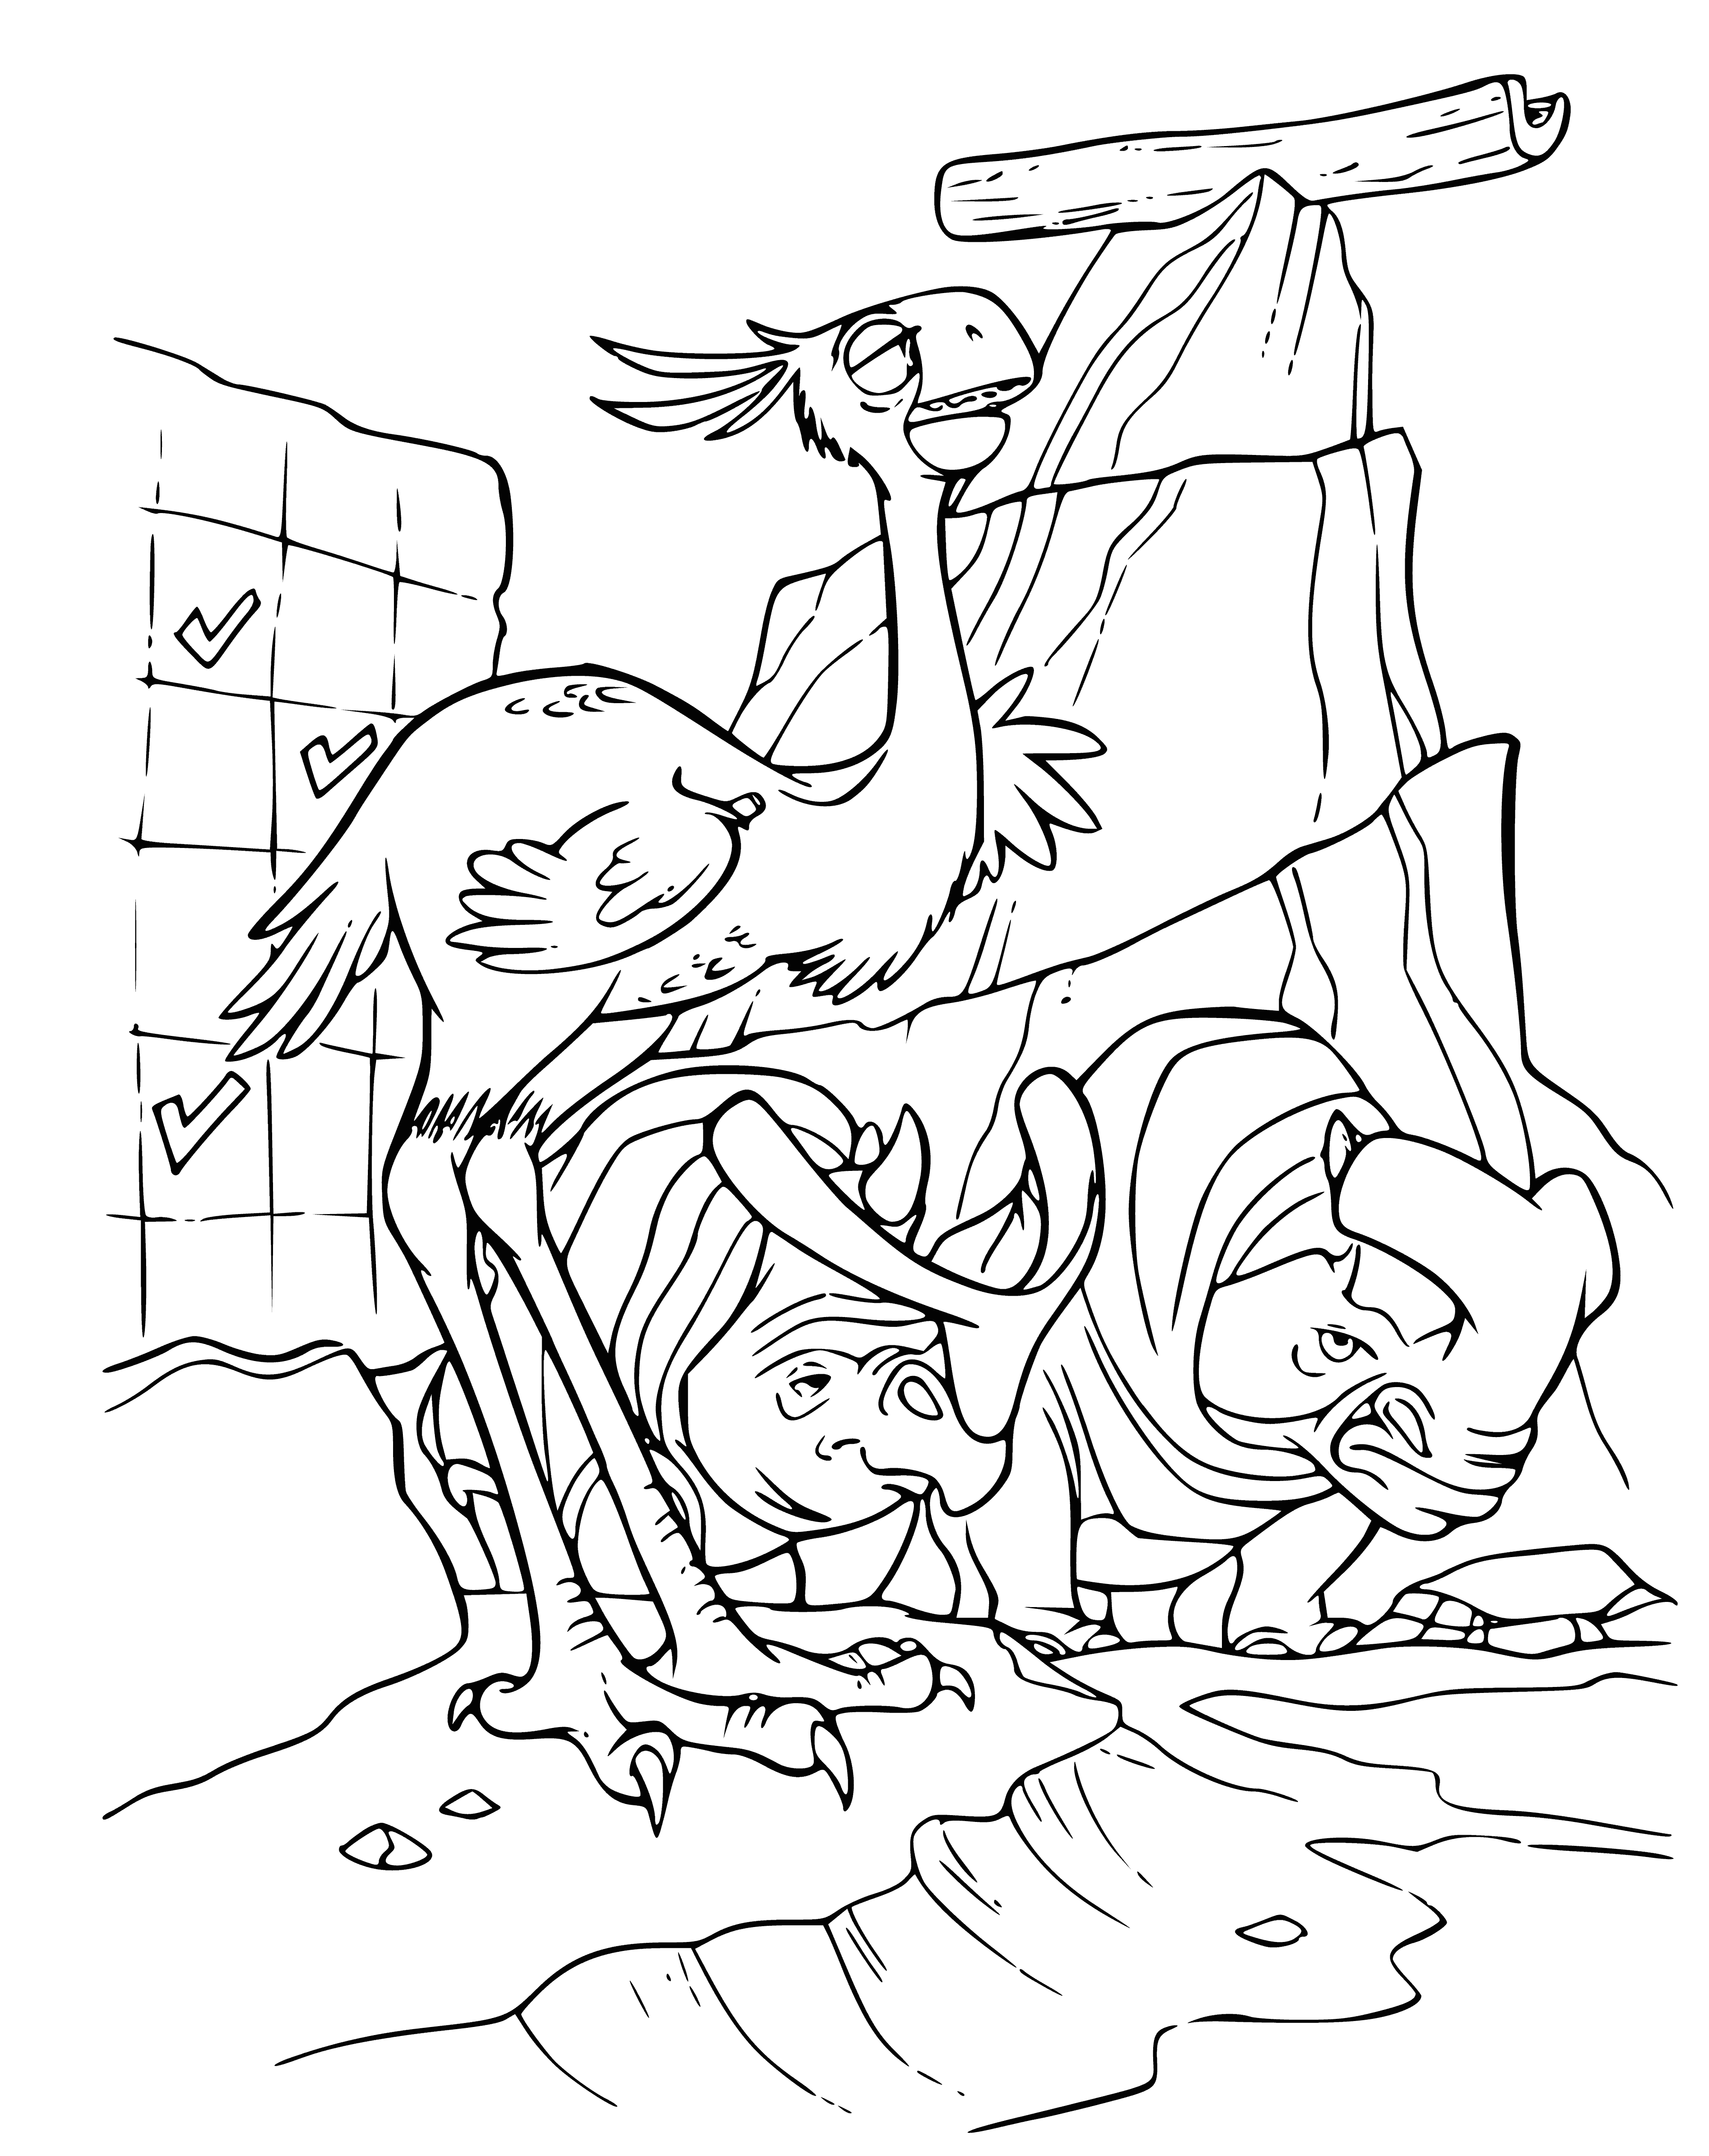 Rescue ship coloring page